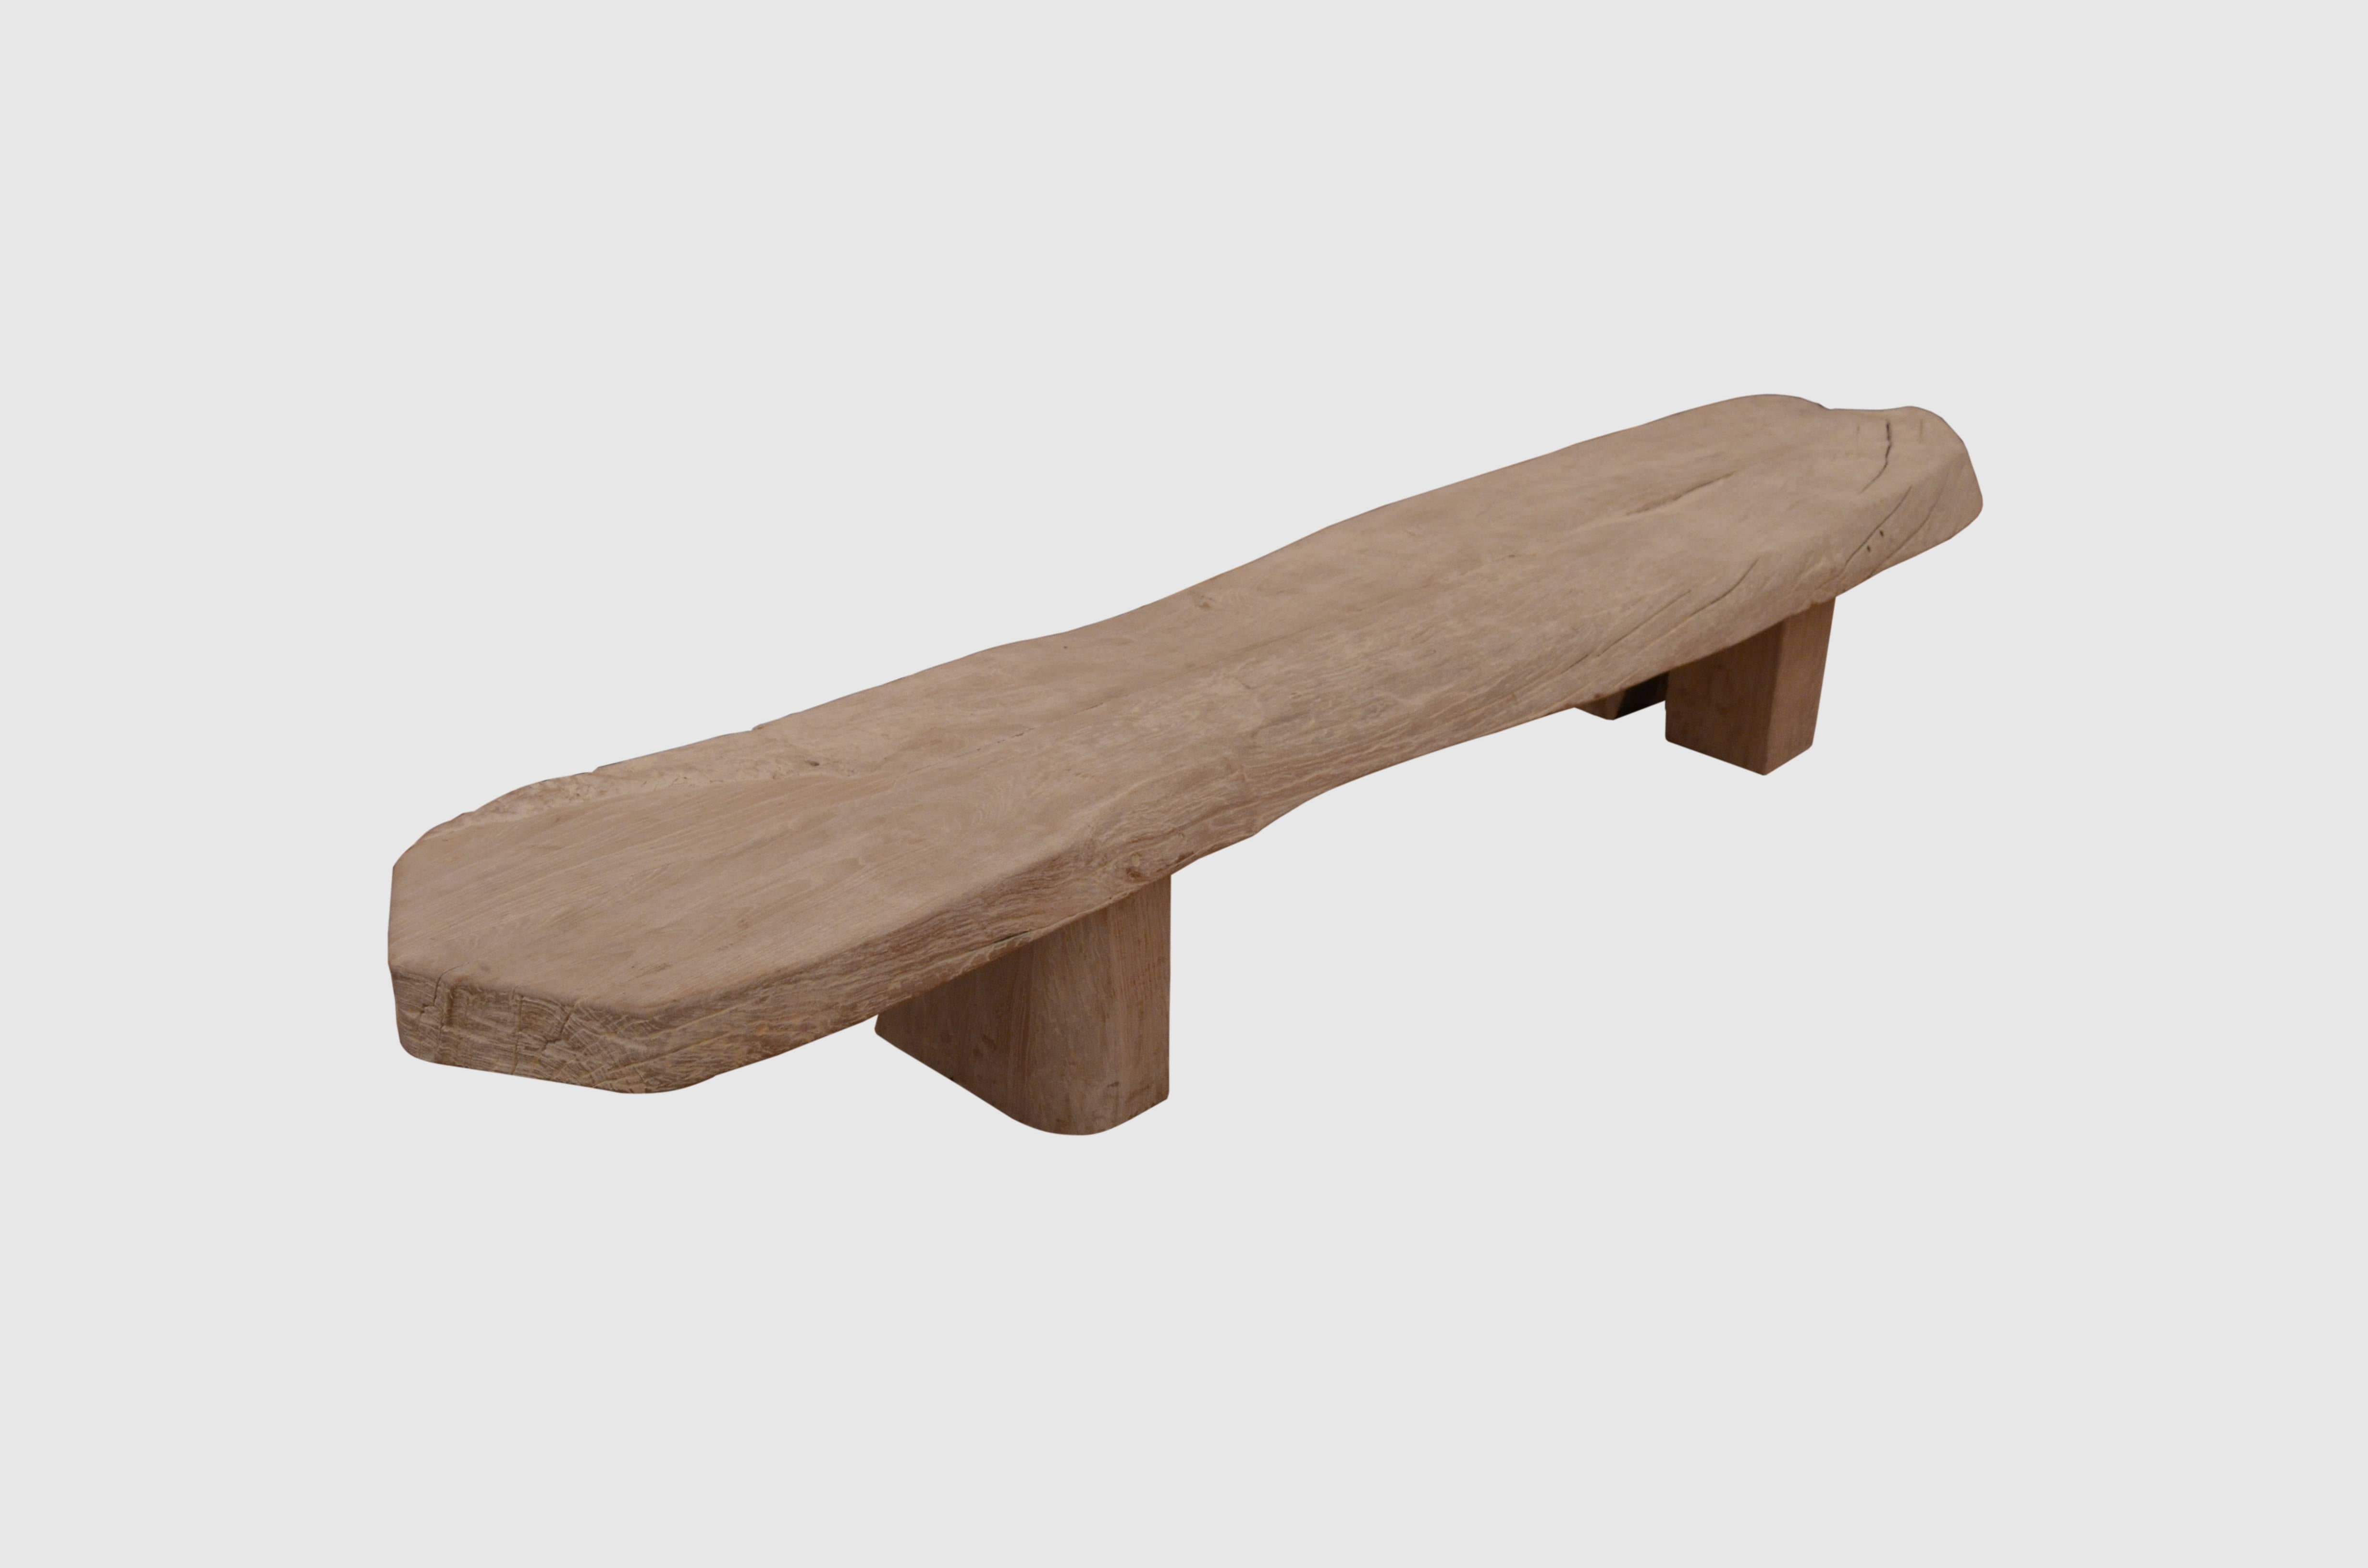 Bleached teak wood coffee table or bench. We added straight modern legs which can also be modified for a console or dining table height.

The St. Barts collection features an exciting new line of organic white wash and natural weathered teak